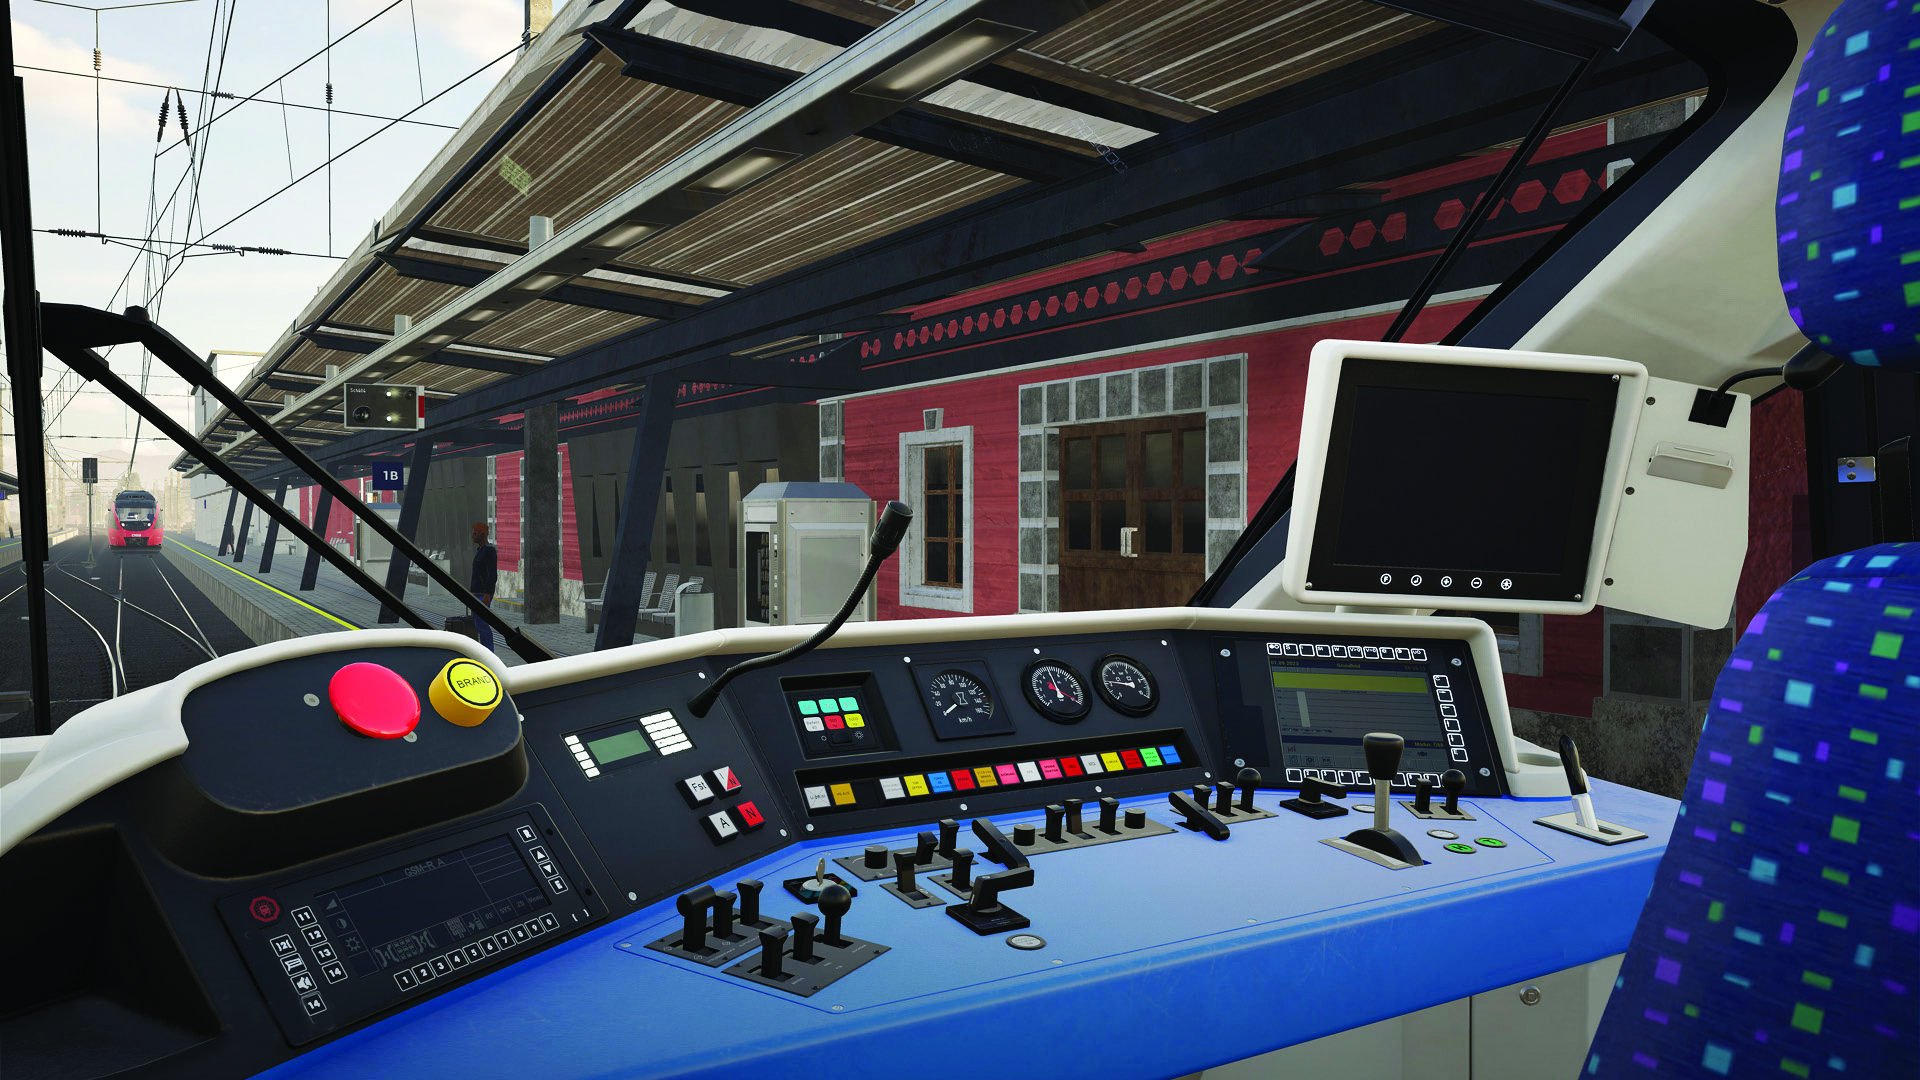 The inside of train cab with all the controls on display.